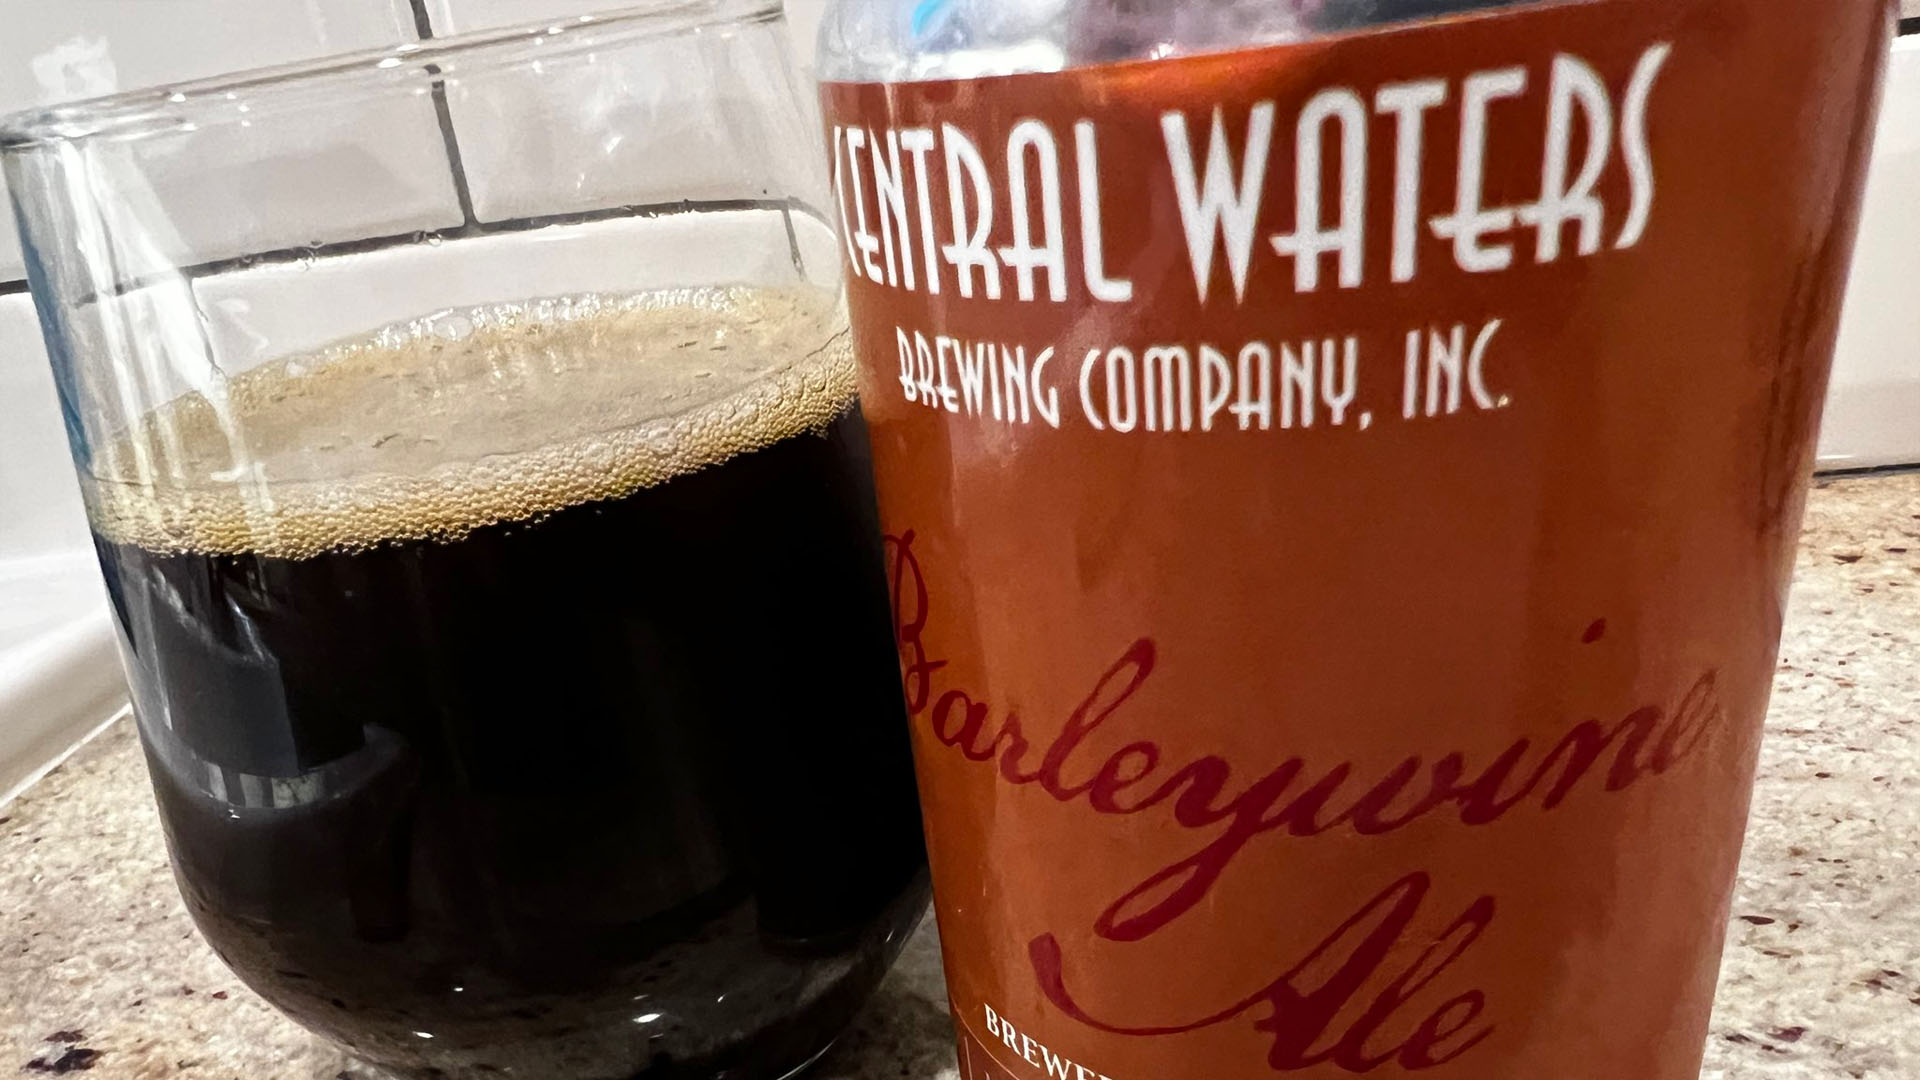 Central Waters Brewing